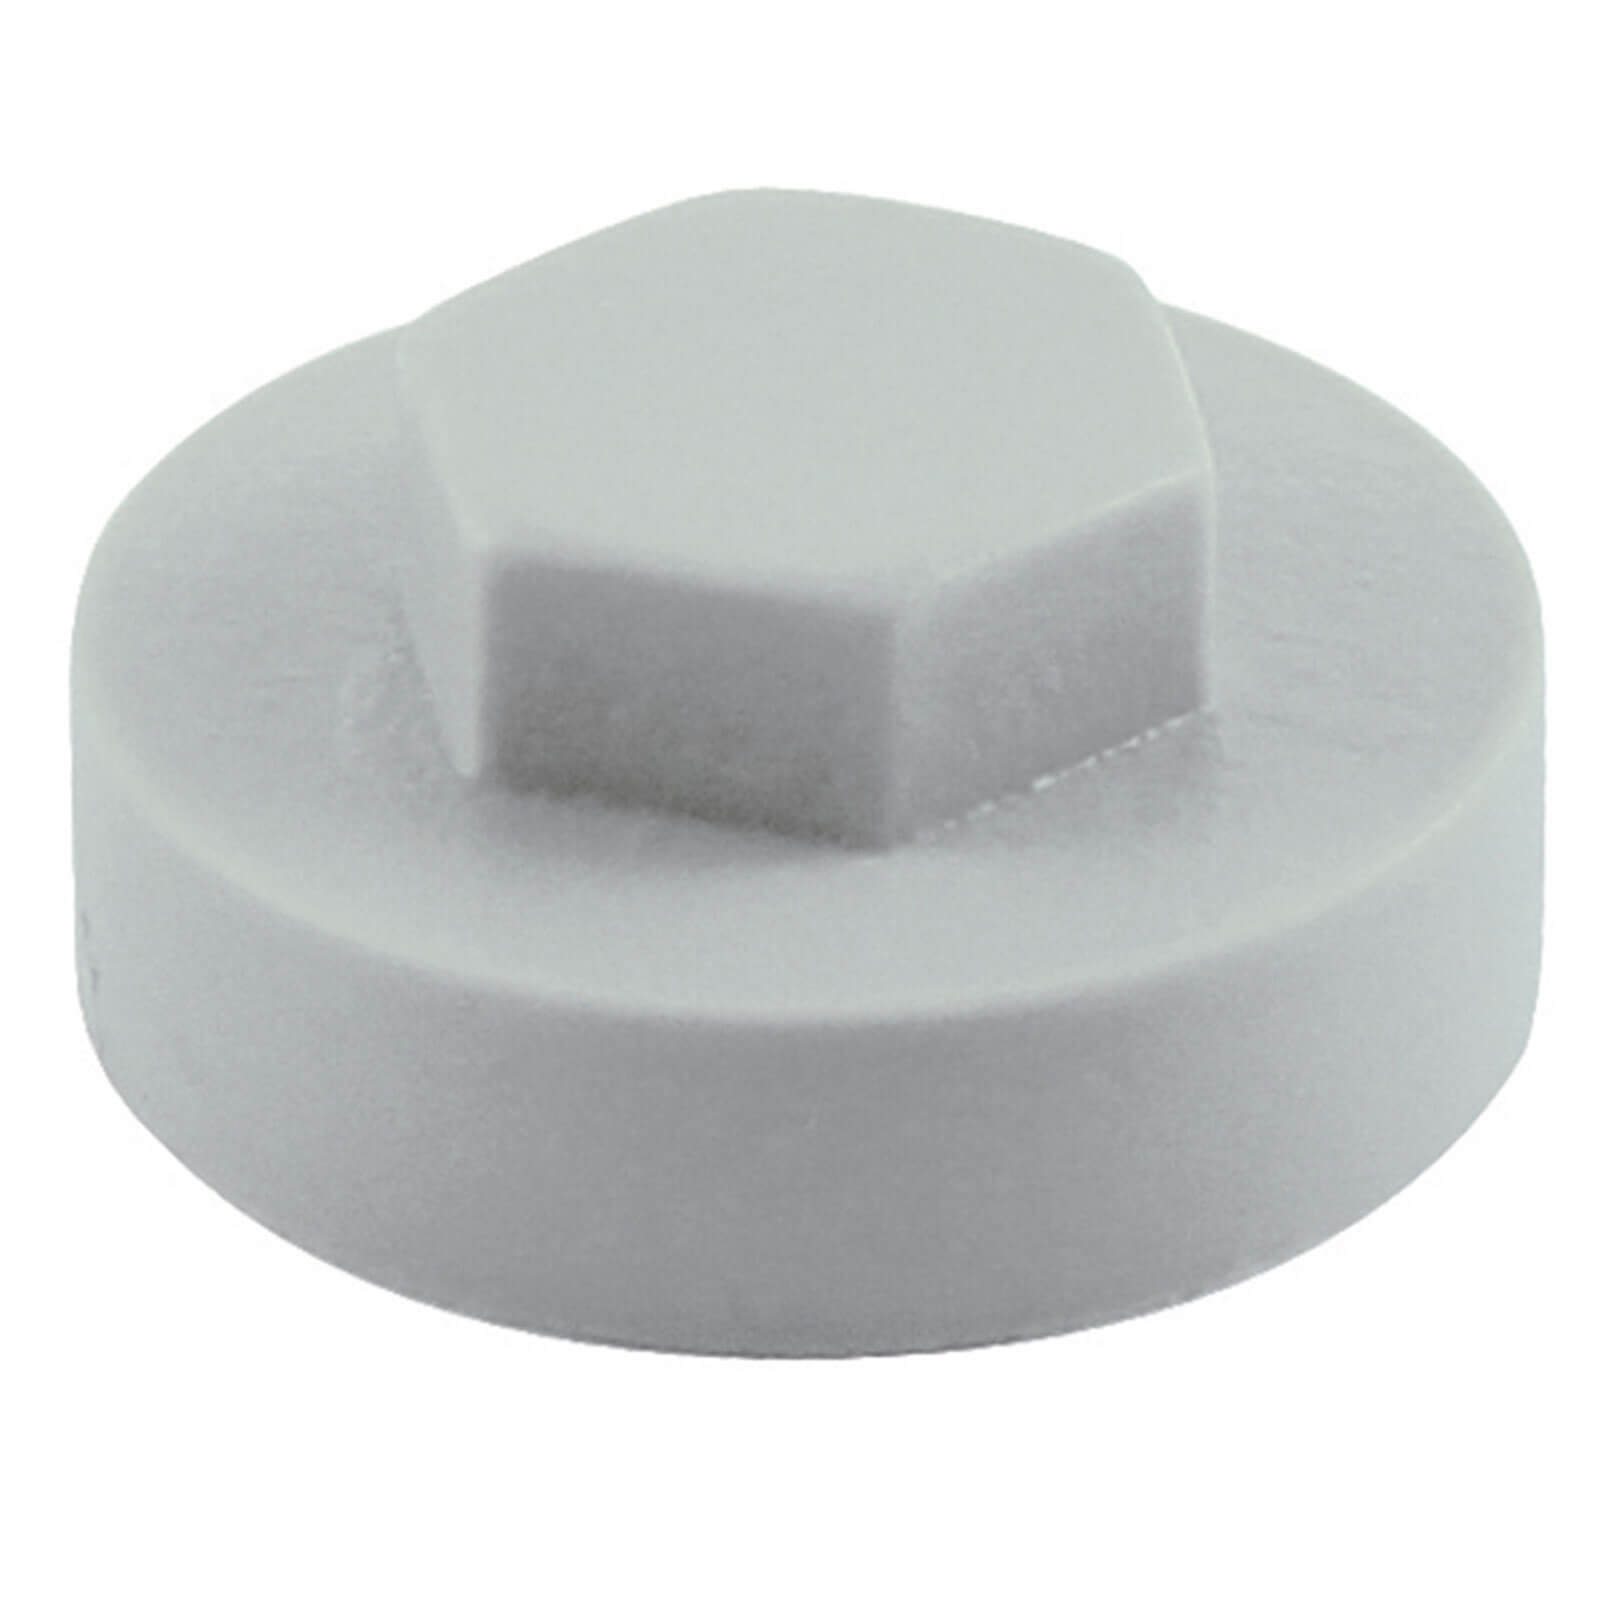 Image of Colour Match Hexagon Screw Cover Cap 5/16" x 19mm Goosewing Grey Pack of 1000